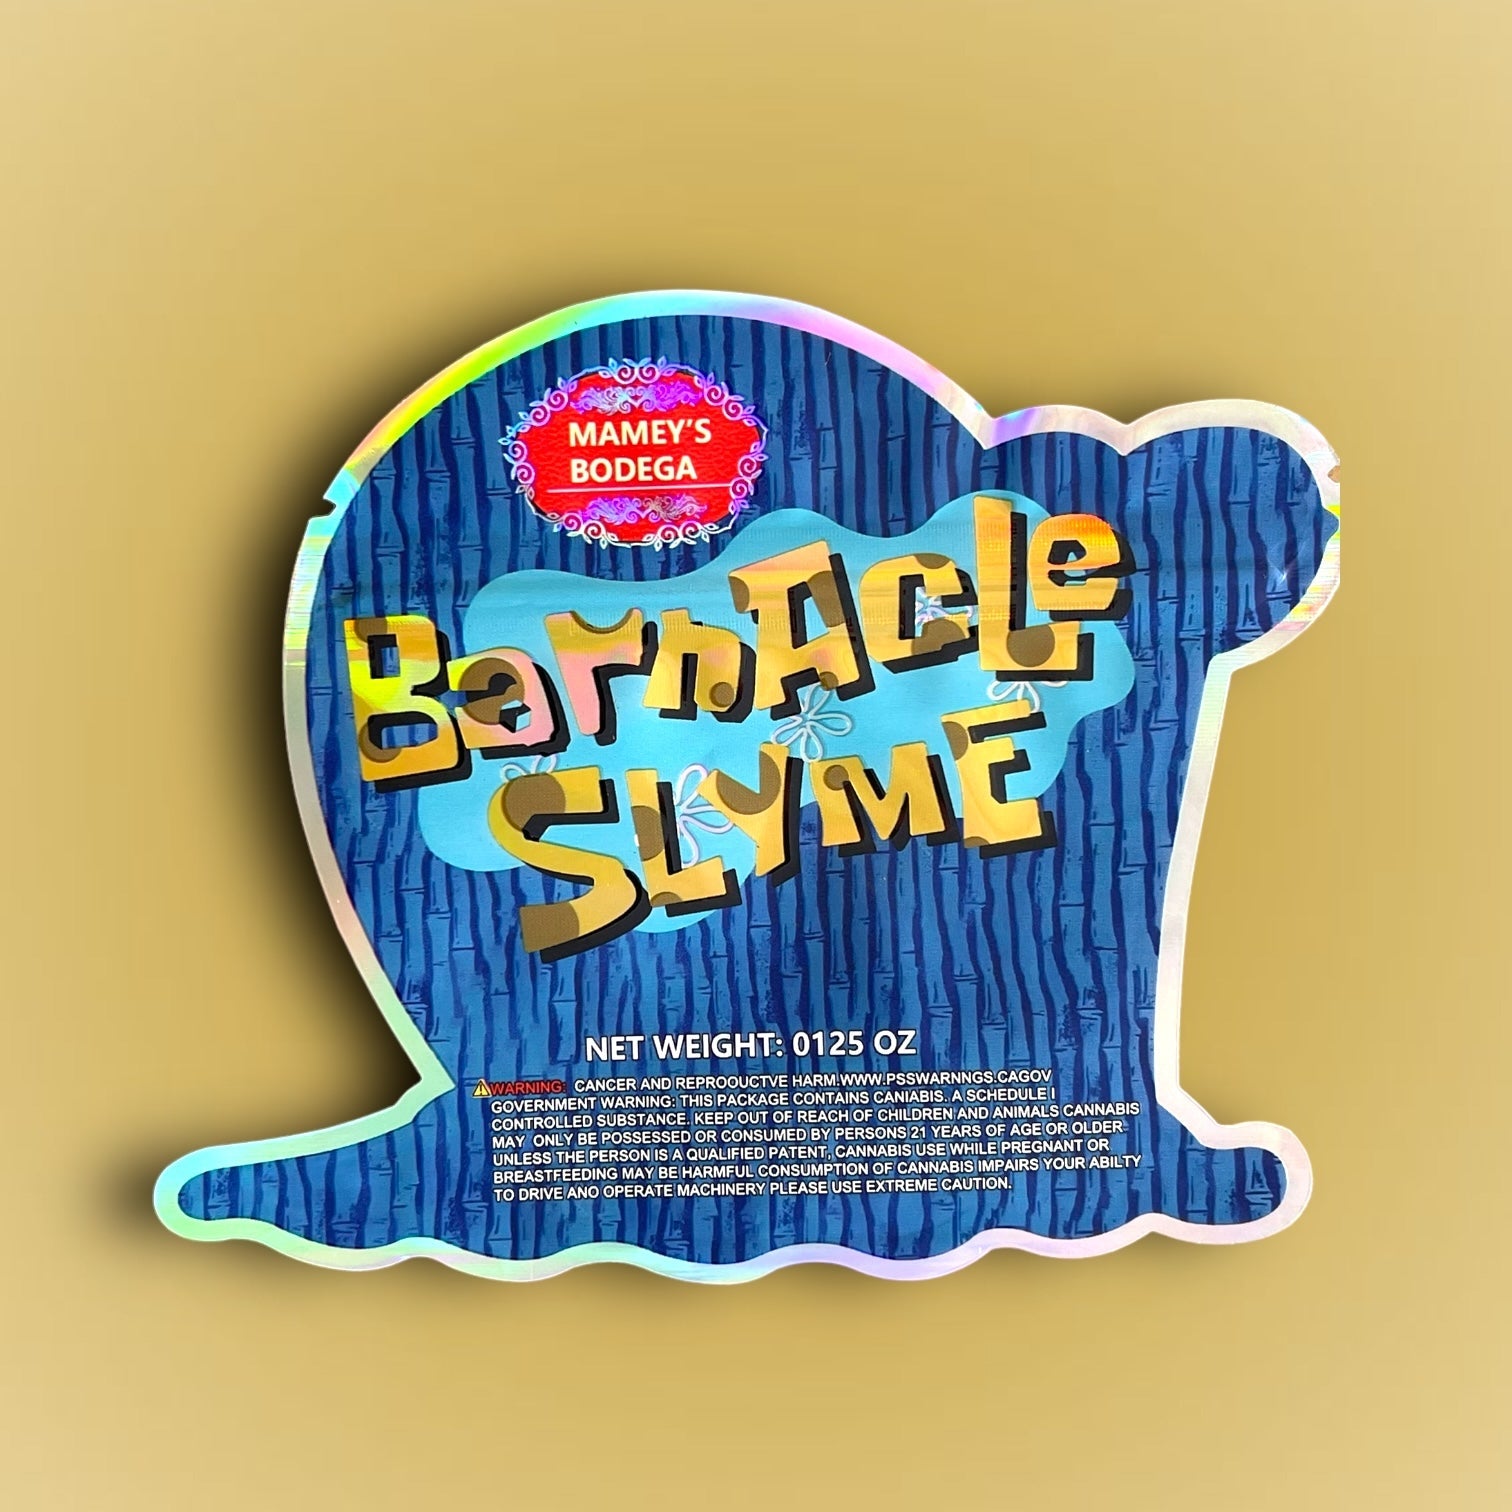 Barnacle Slyme Mameys Bodega Cut Out Mylar Bags 3.5g Die Cut Holographic